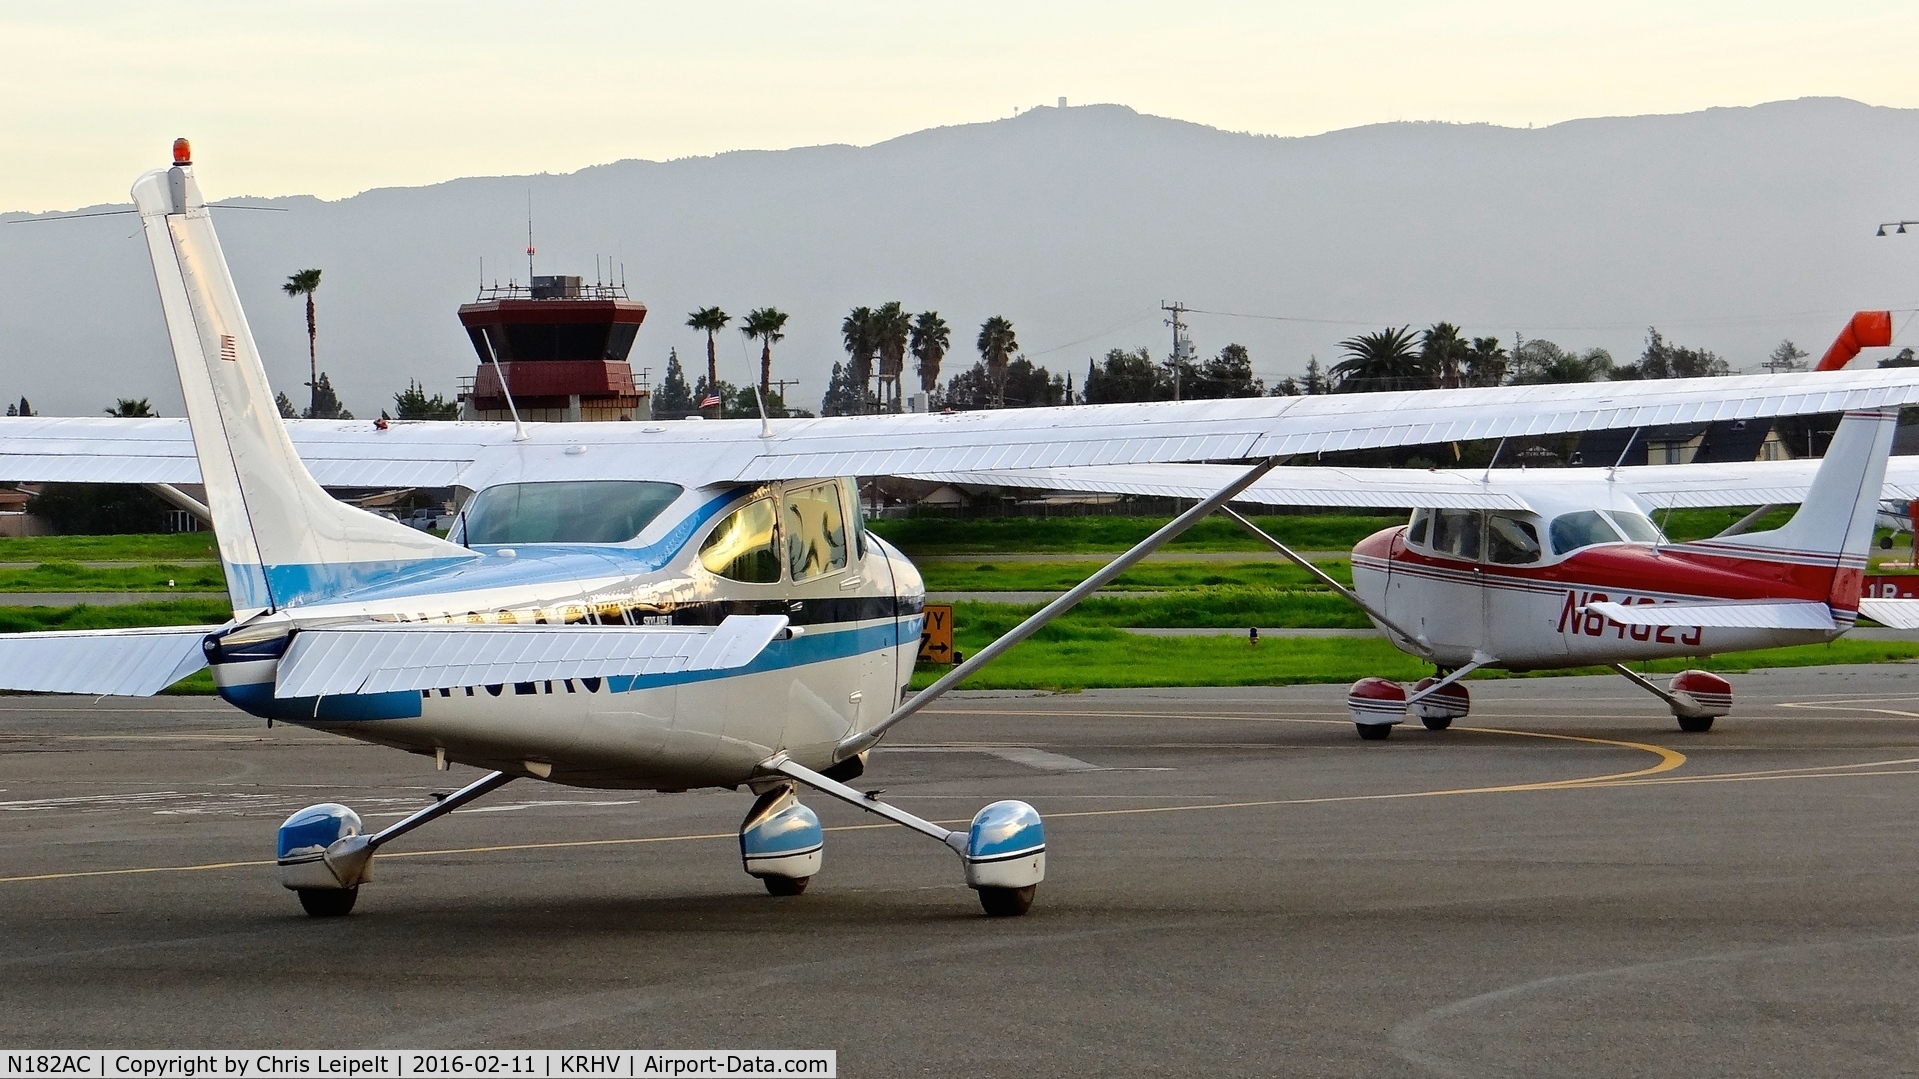 N182AC, 1979 Cessna 182Q Skylane C/N 18267482, California-based 1979 Cessna 182Q taxing out for departure behind a local C172 at Reid Hillview Airport, San Jose, CA.